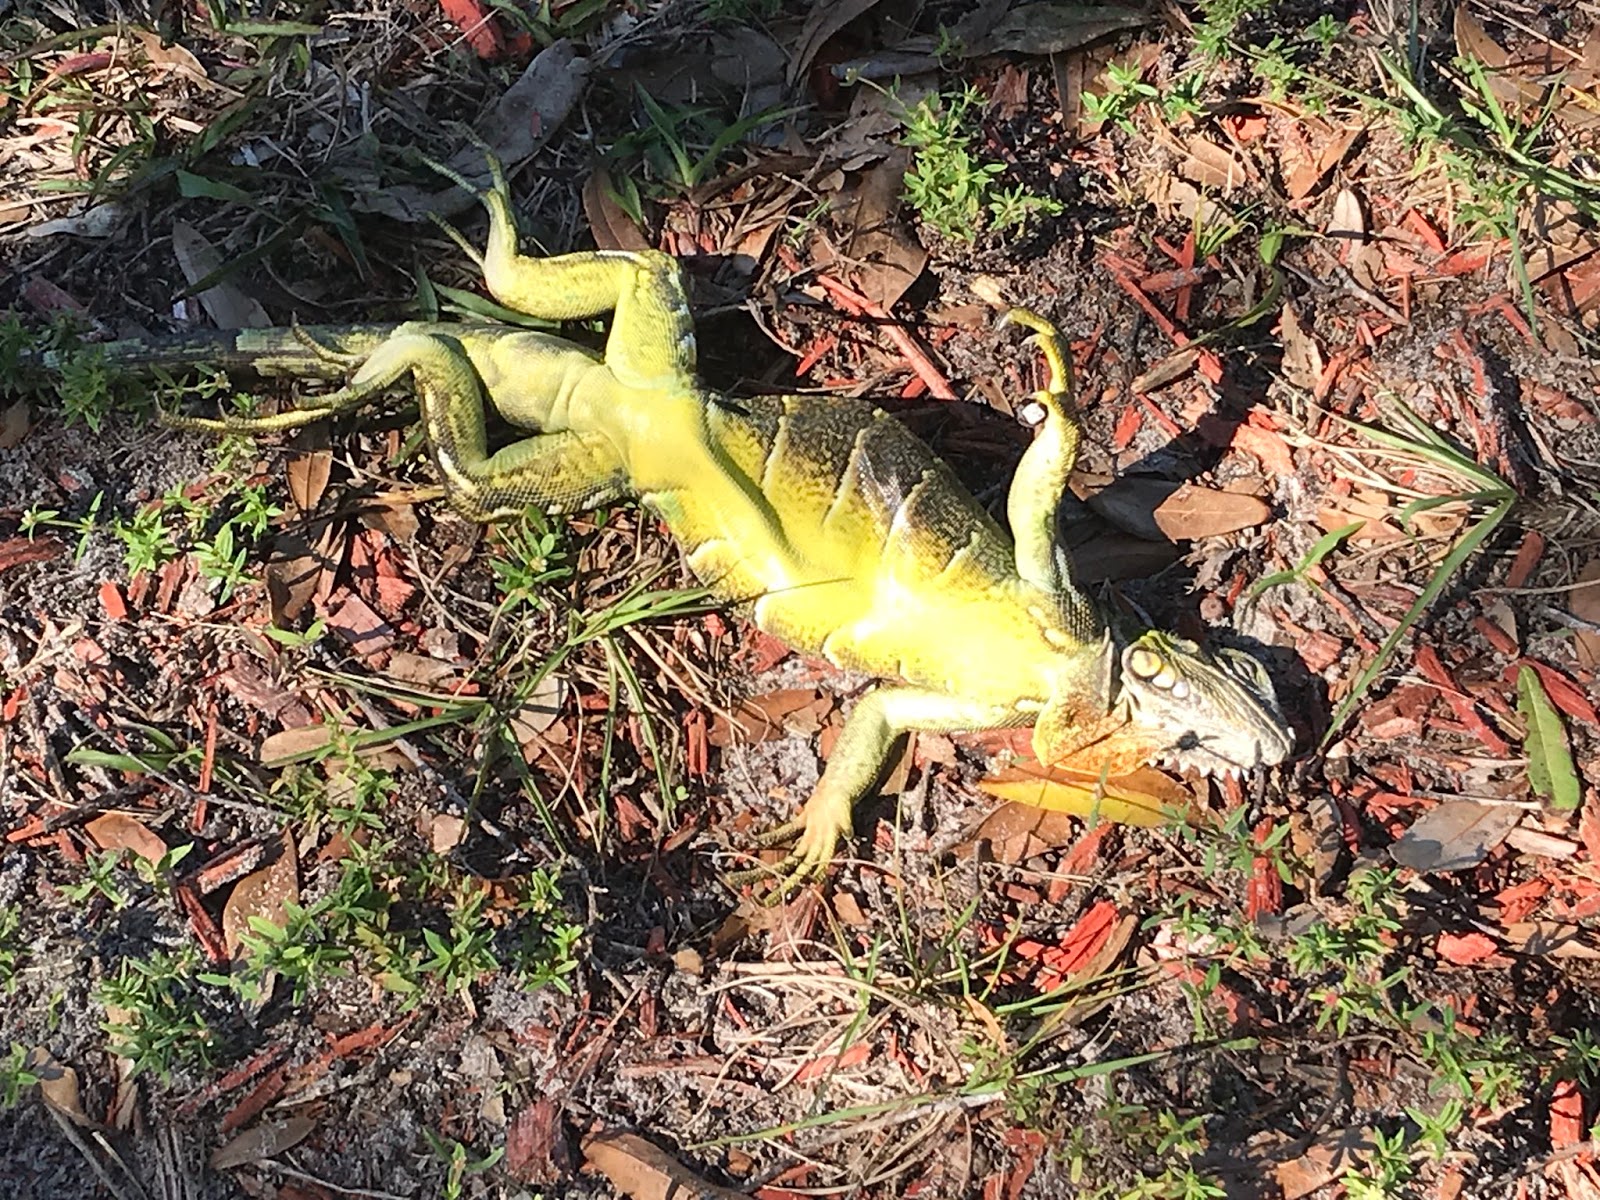 Frozen iguanas falling from trees during cold snap in Florida - USA NEWS